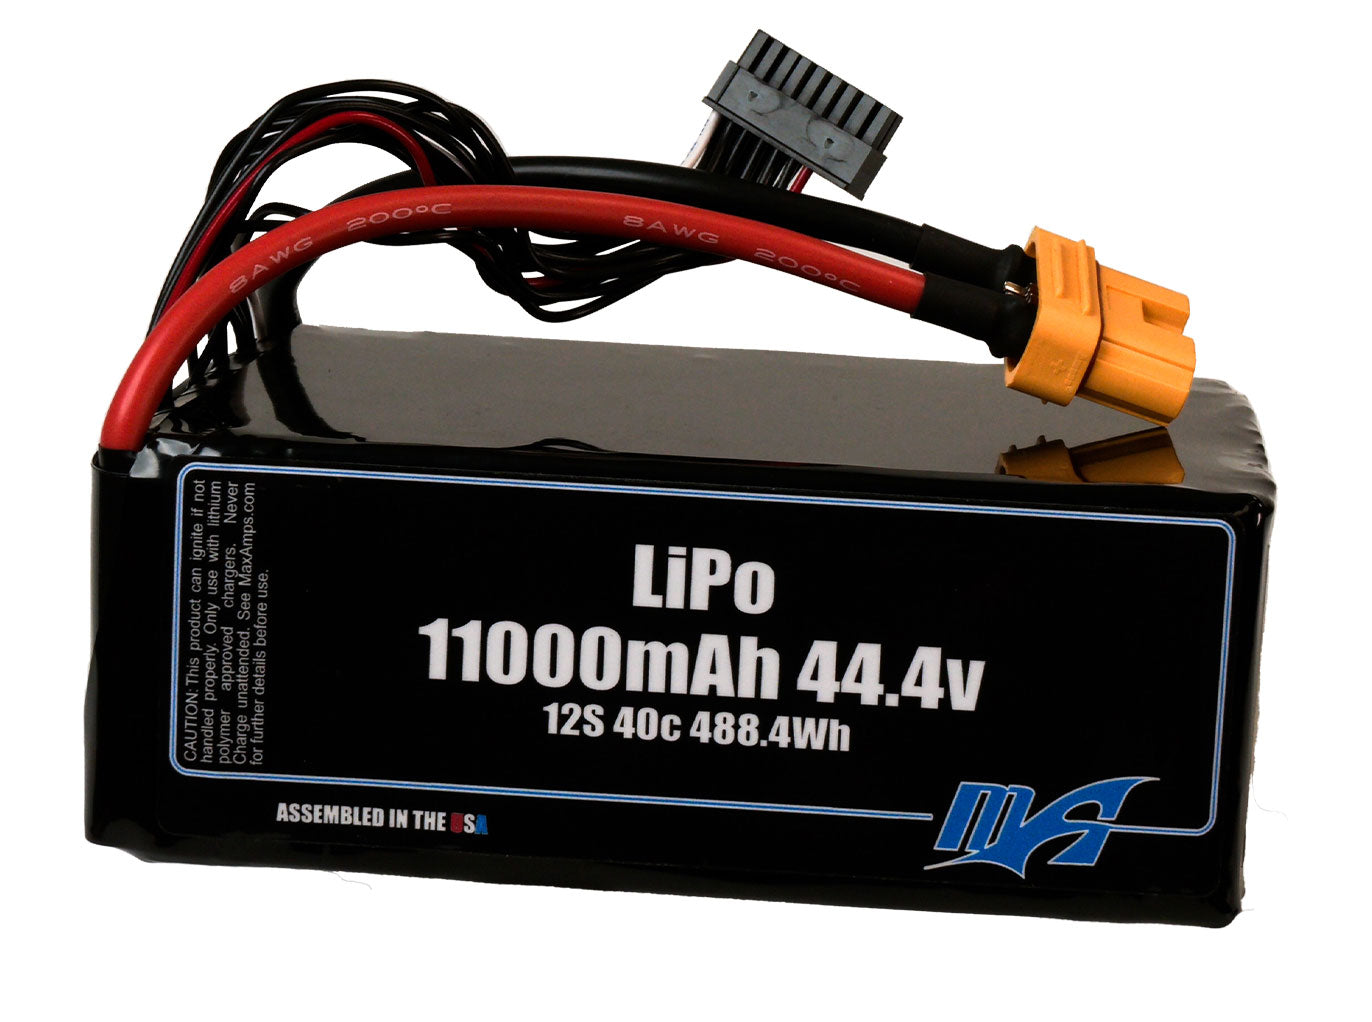 A MaxAmps LiPo 11000mAh 12S 44.4 volt battery pack with AS150U connector